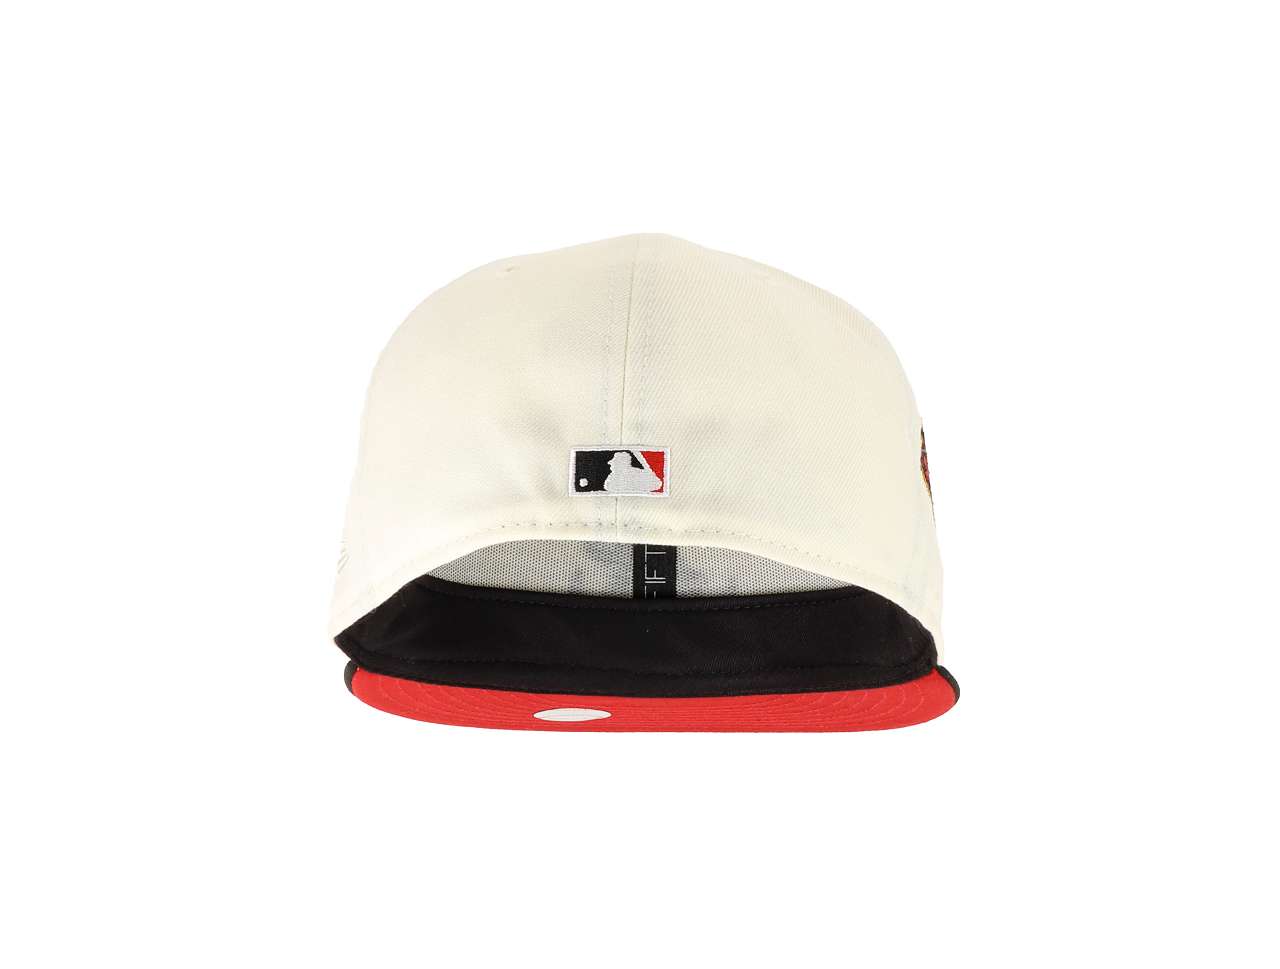 Atlanta Braves MLB Two Tone Cooperstown Braves Sidepatch Chrome Black Scarlet 59Fifty Basecap New Era